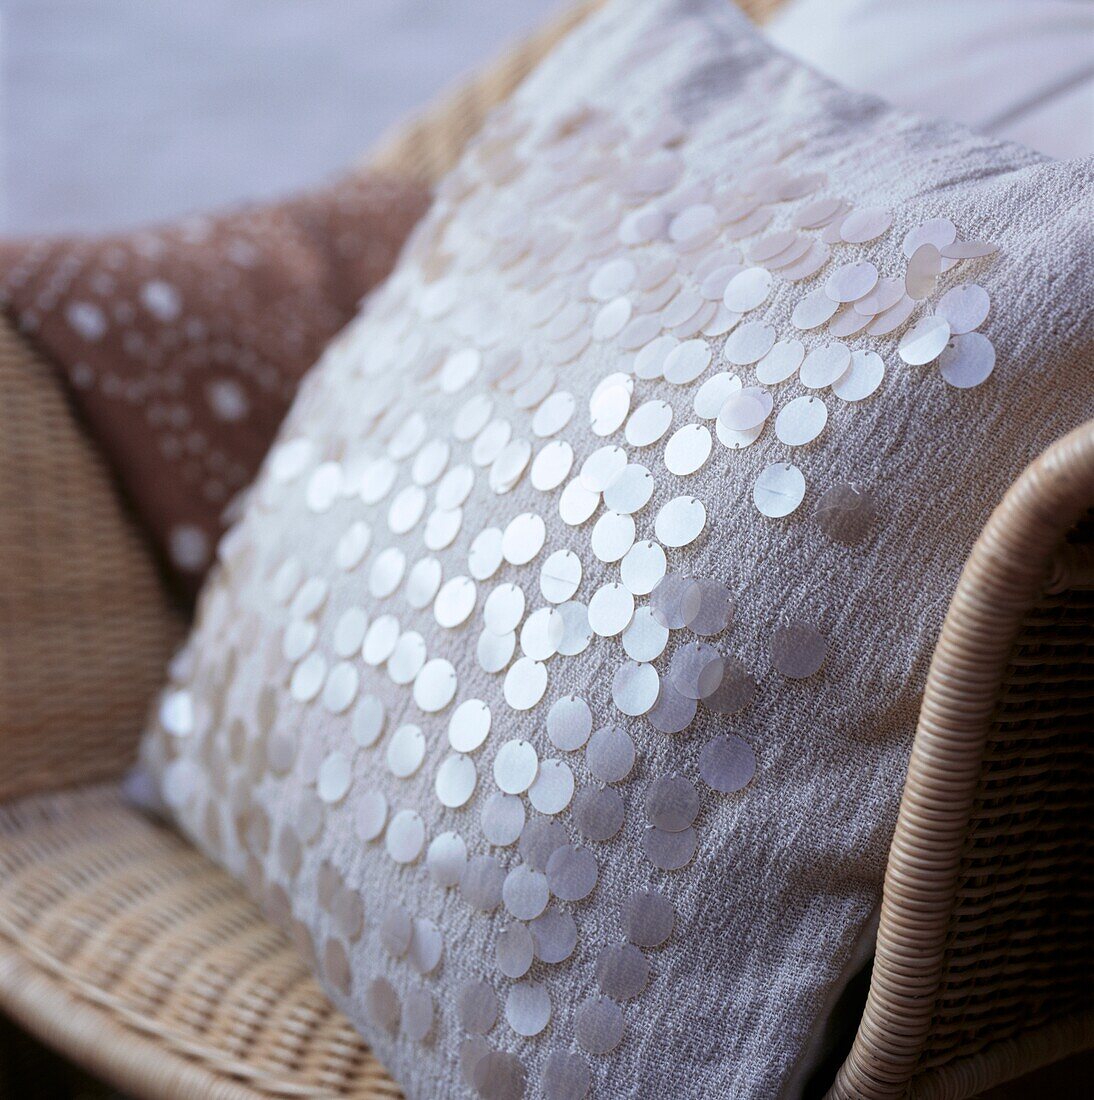 Sequinned cushion covers on woven rattan armchair